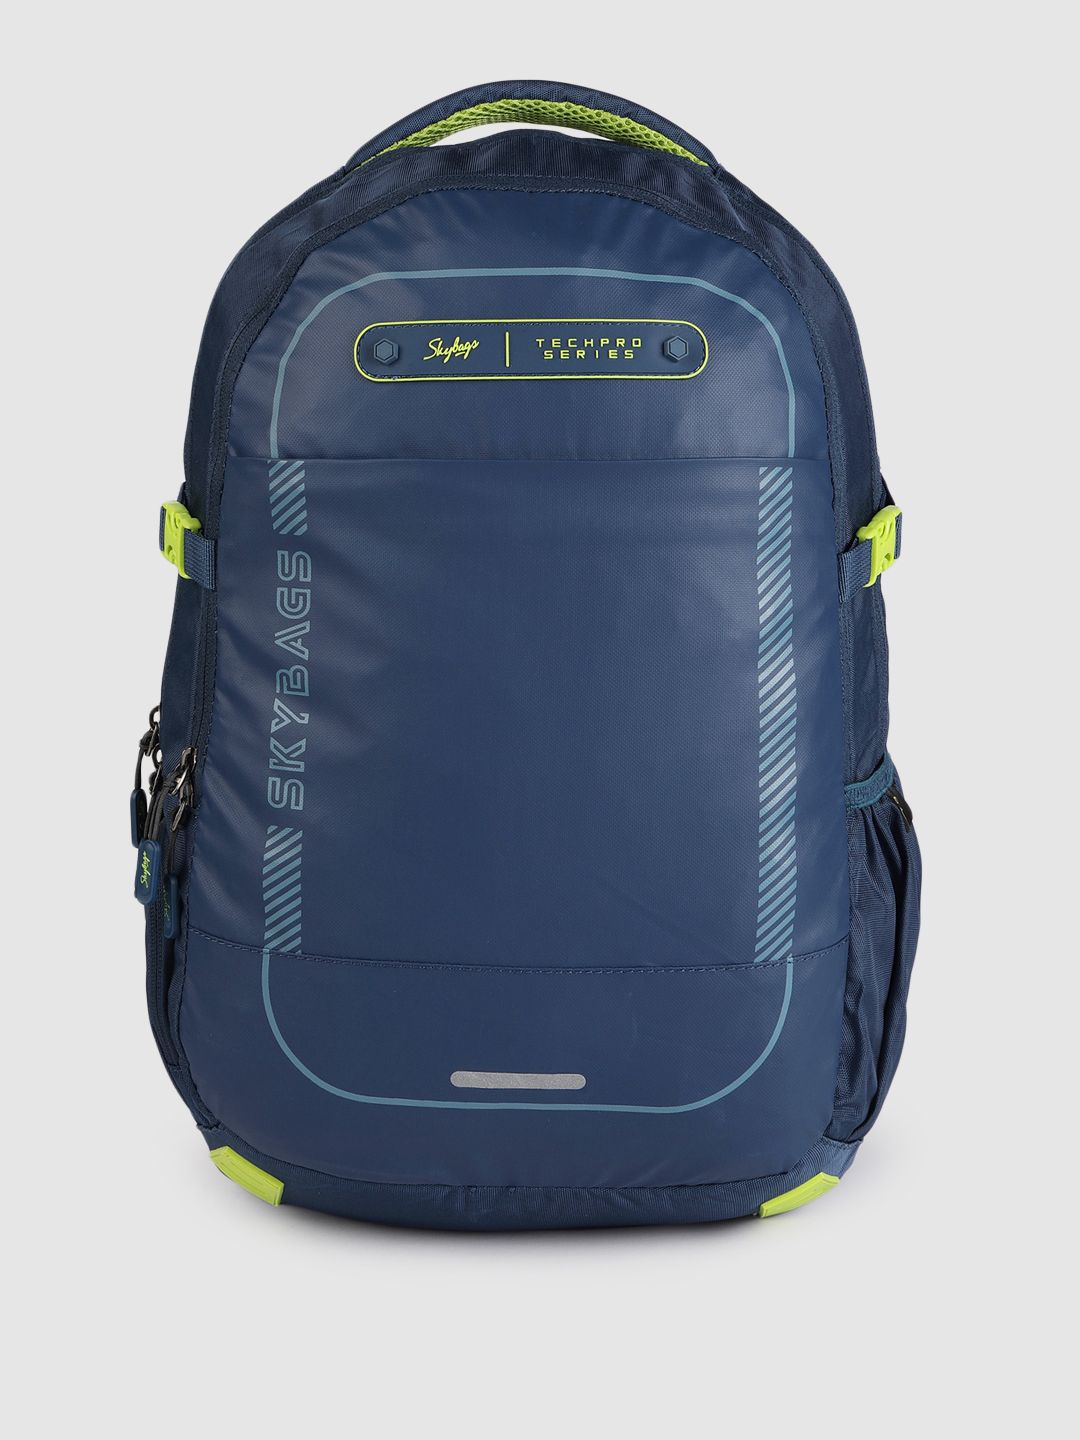 Skybags Blue Brand Logo Backpack with Compression Straps Price in India